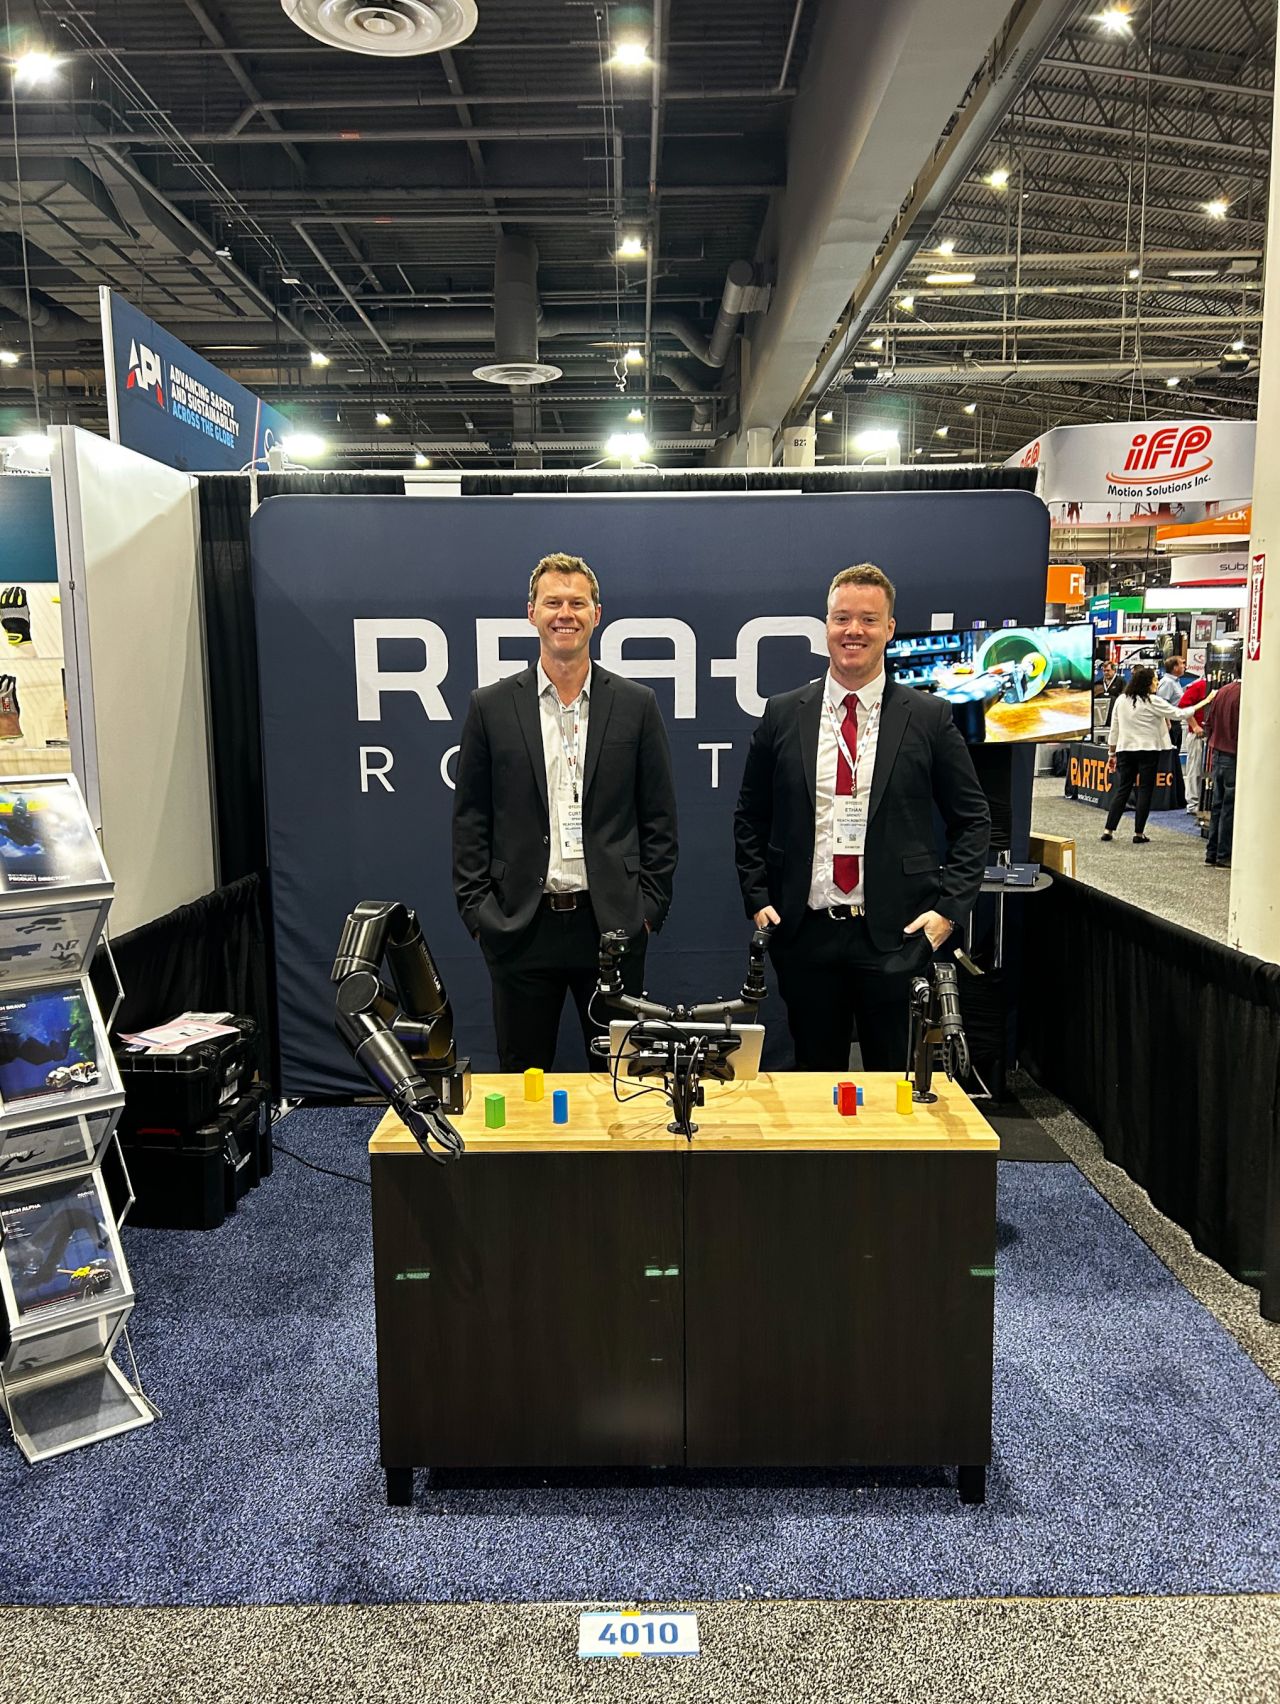 Reach Robotics team members Curtis Opsahl, Sales Engineer for North America & Ethan Grenot, Technical Sales Engineer